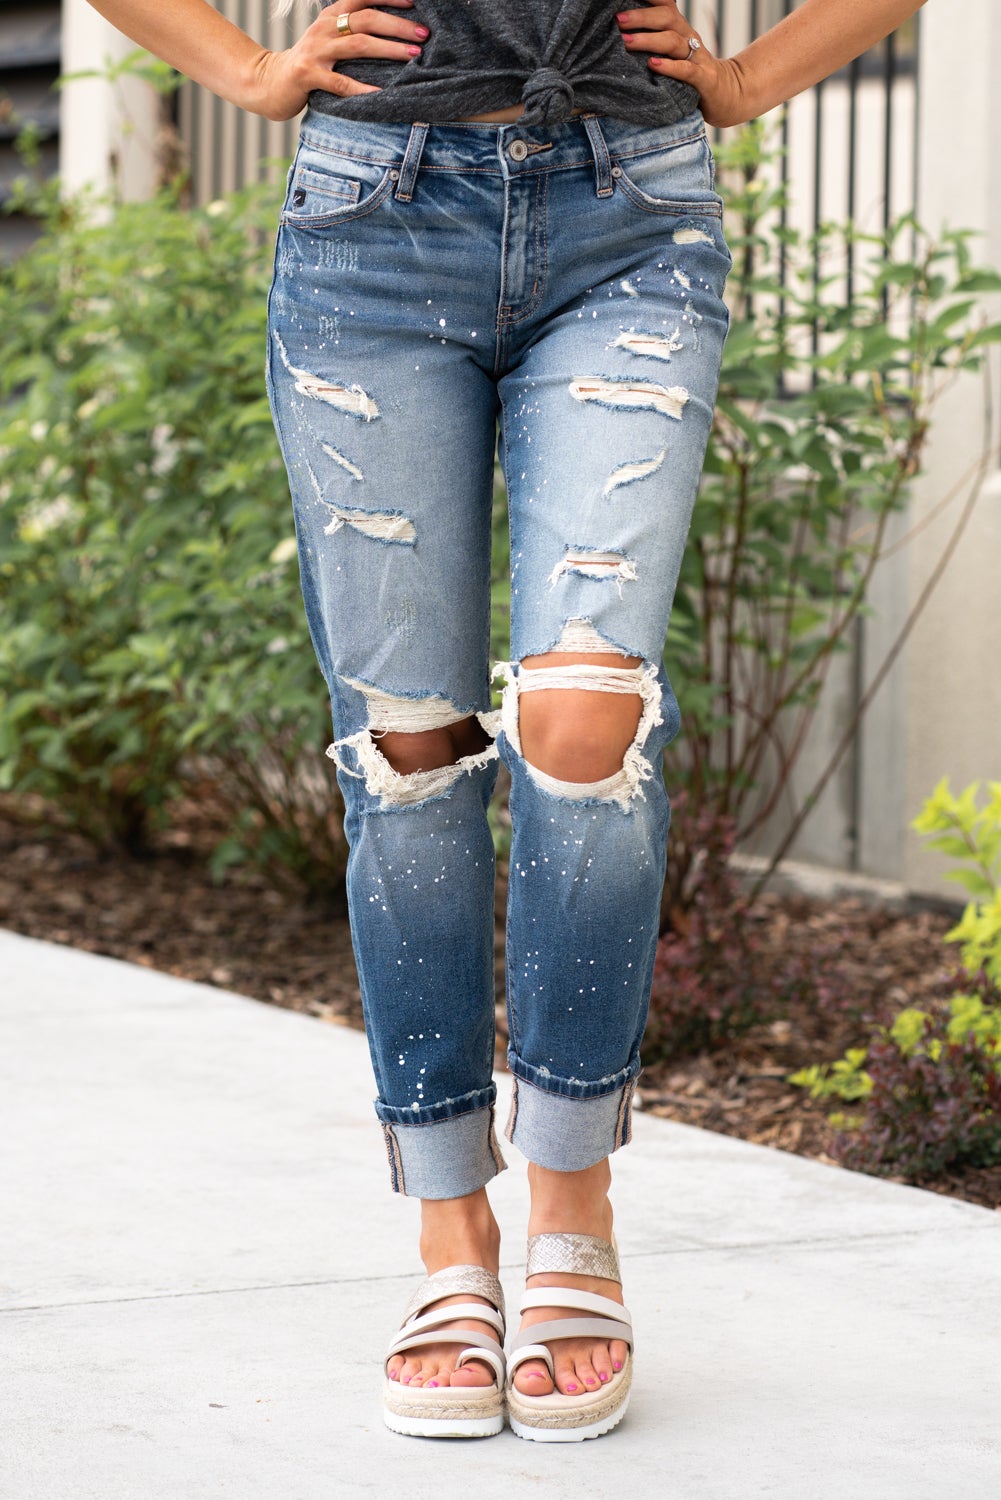 KanCan Jeans Color: Medium Blue Wash Cut: Cuffed Boyfriend Skinny, 27" Inseam Rise: High-Rise, 9.75" Front Rise 99% Cotton, 1% Spandex Stitching: Classic Fly: Zipper  Style #: KC8368M Contact us for any additional measurements or sizing.  Haley is 5’6" and wears size 1 in jeans, a small top and 7.5 in shoes. She is wearing a size 24/1 in these jeans.